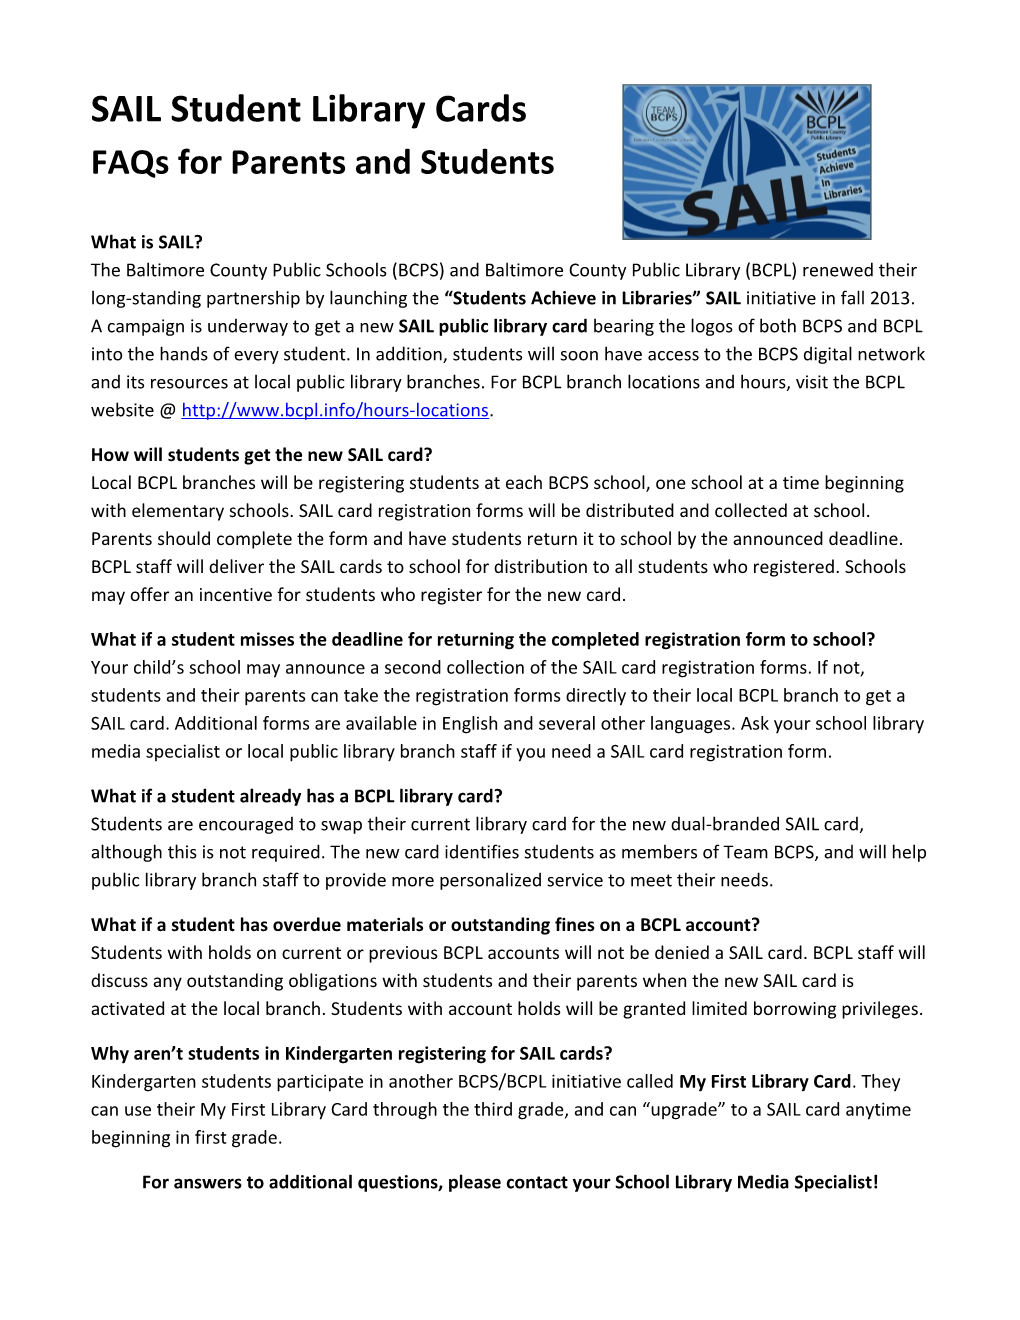 SAIL Student Library Cards Faqs for Parents and Students